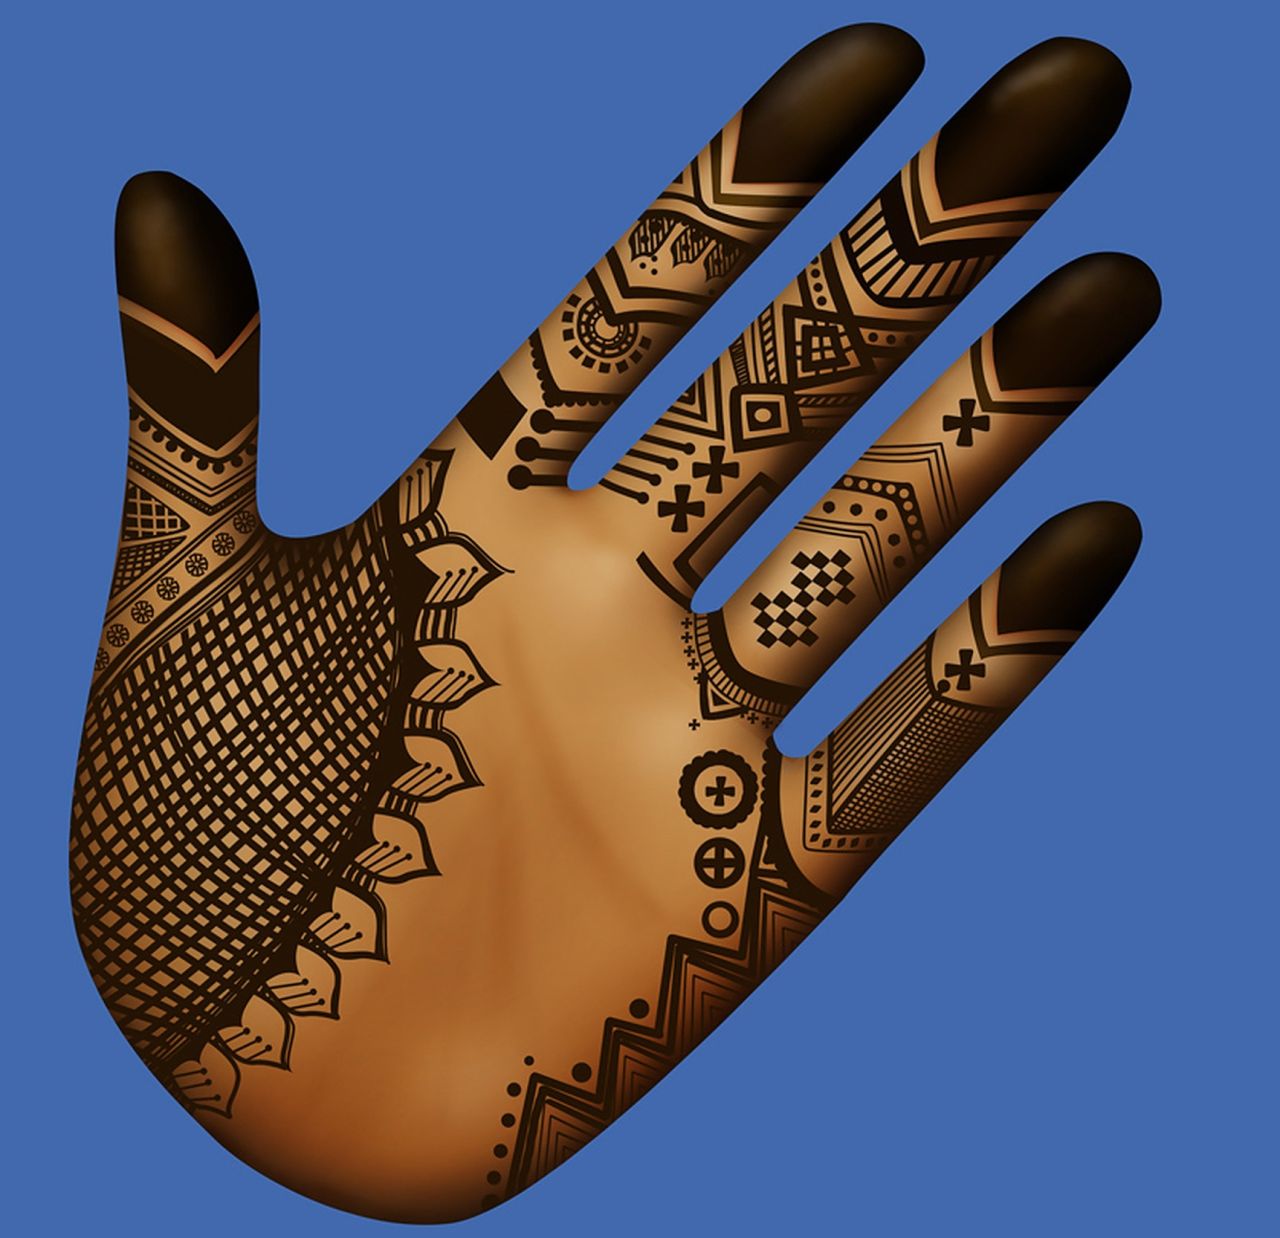 Henné, local drawings made on Mandinka women hands and/or feet during wedding and ceremonies.